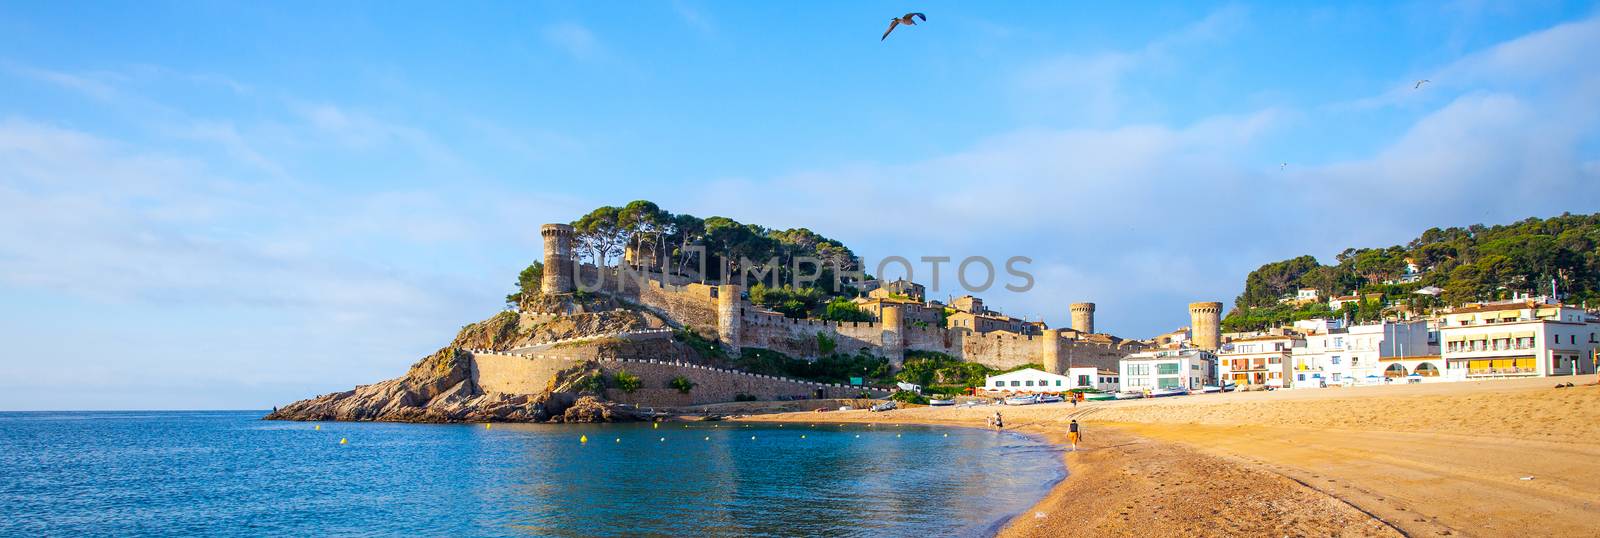 Tossa de Mar, Catalonia, Spain, JUNY 13, 2013, the panorama overlooking the bay Badia de Tossa and medieval fortress Vila Vella on a rock. Editorial use only